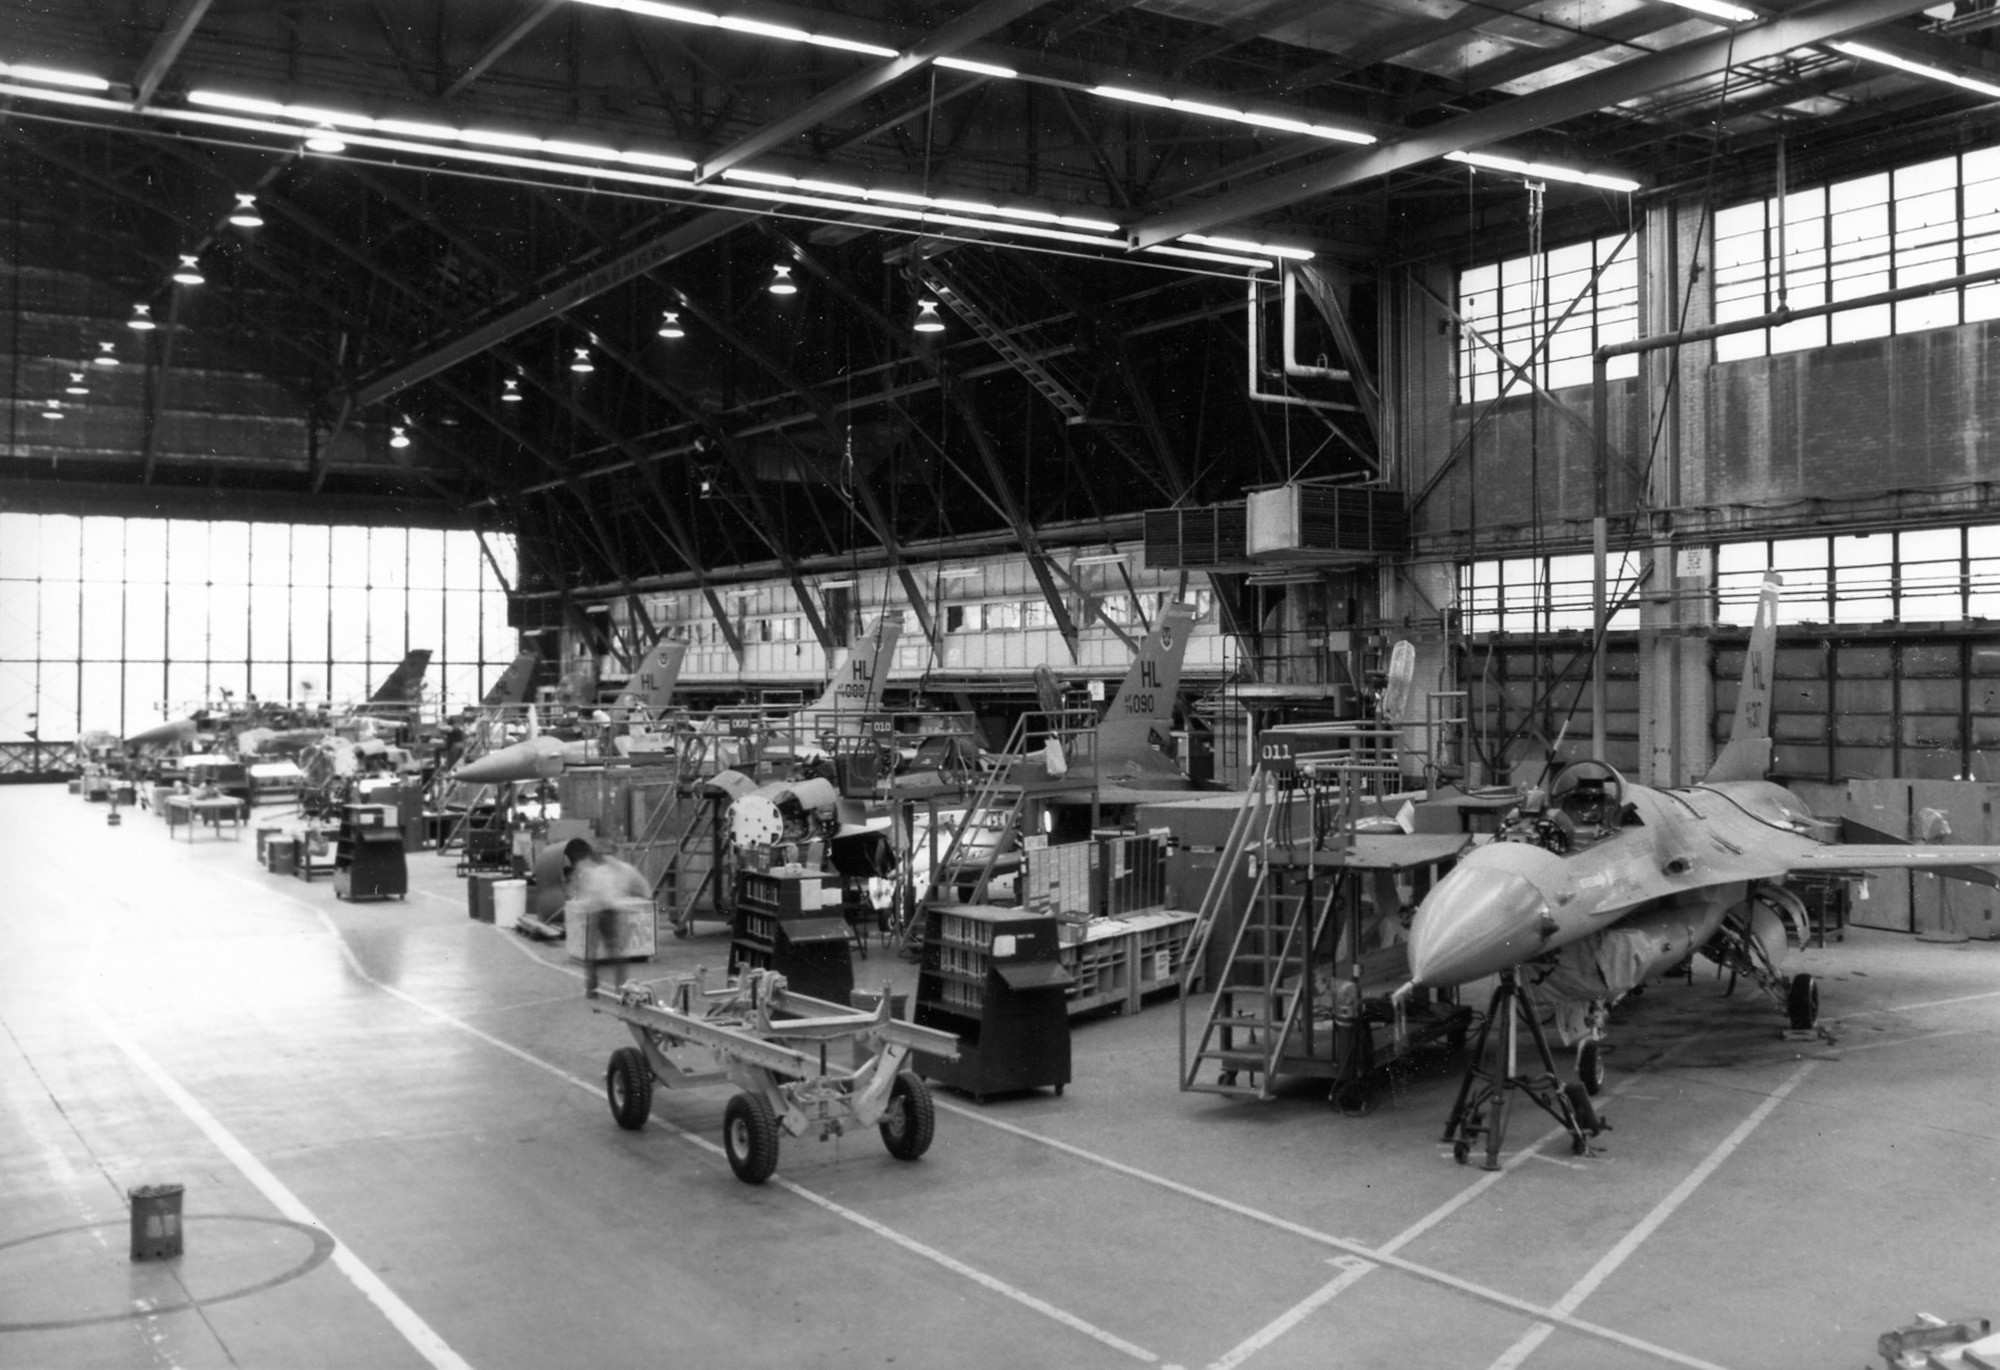 The Ogden Air Logistics Center became the worldwide system and maintenance manager for the F-16 in 1976. The first F-16 to come to Hill AFB for depot maintenance arrived on June 29, 1979. This began a depot maintenance program at the Ogden ALC that continues to the present.